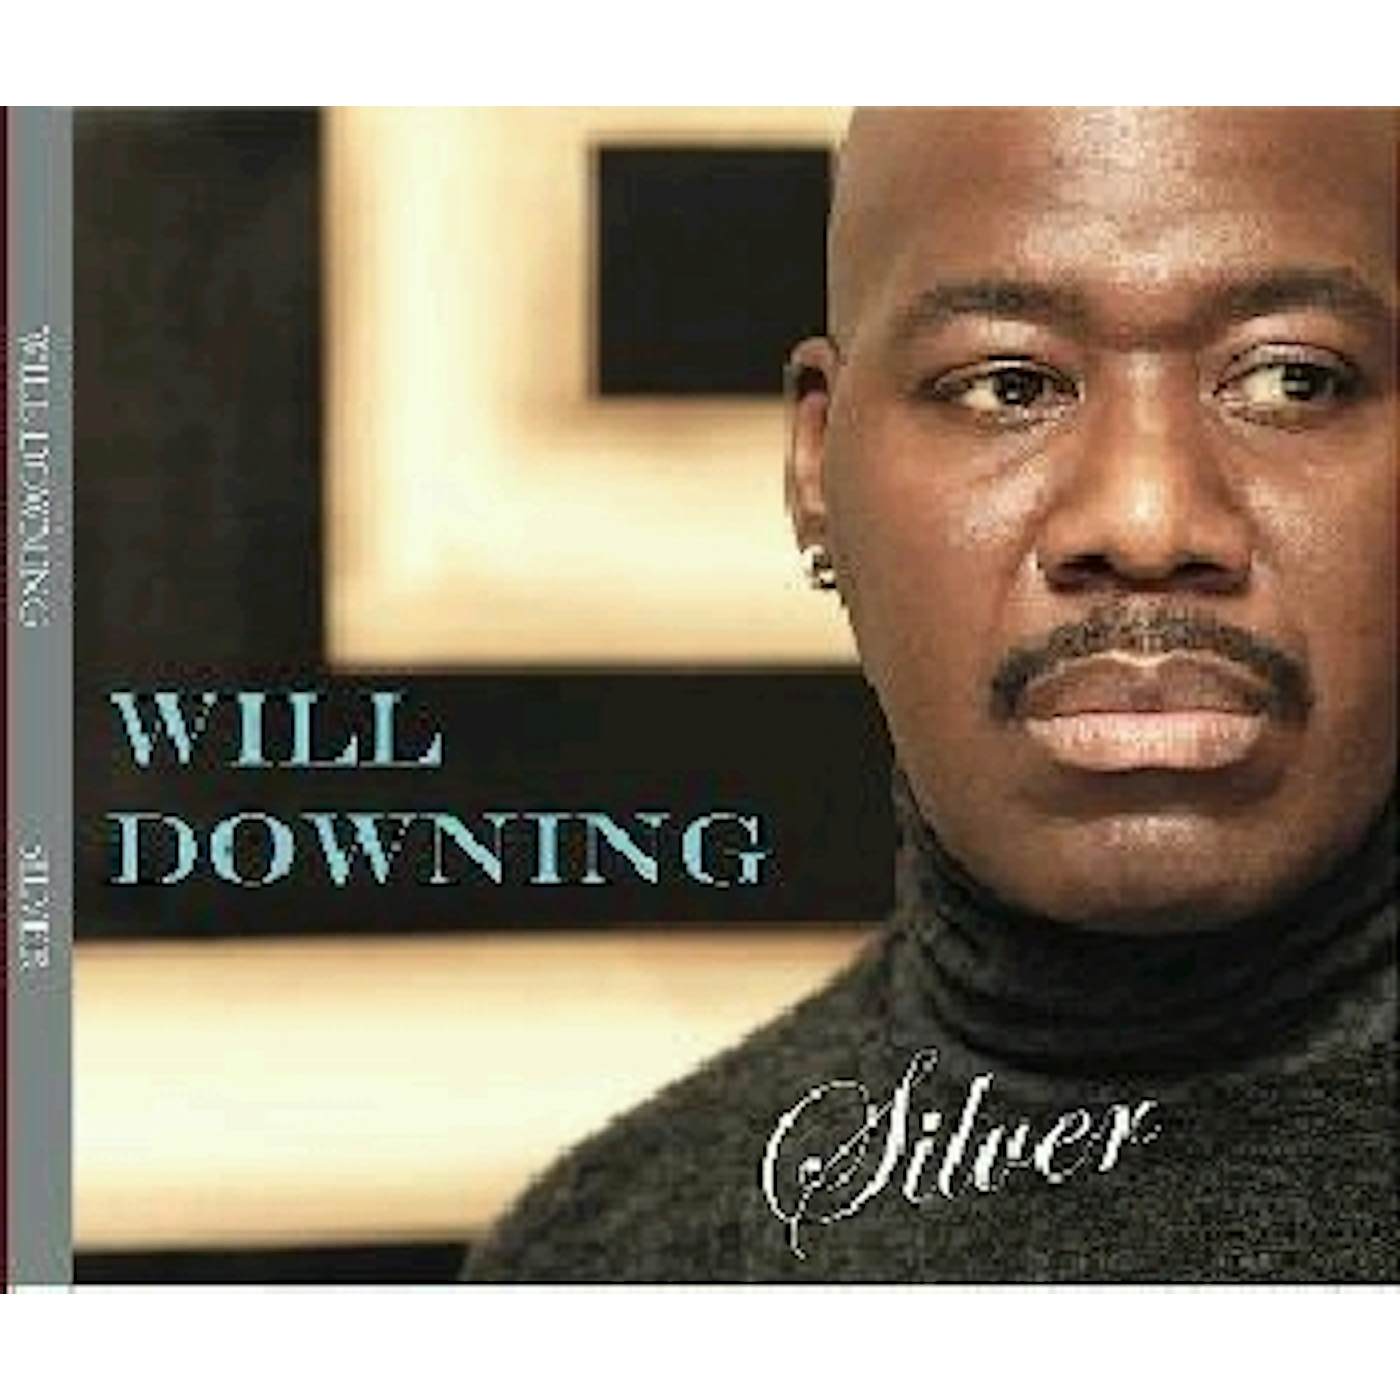 Will Downing SILVER CD